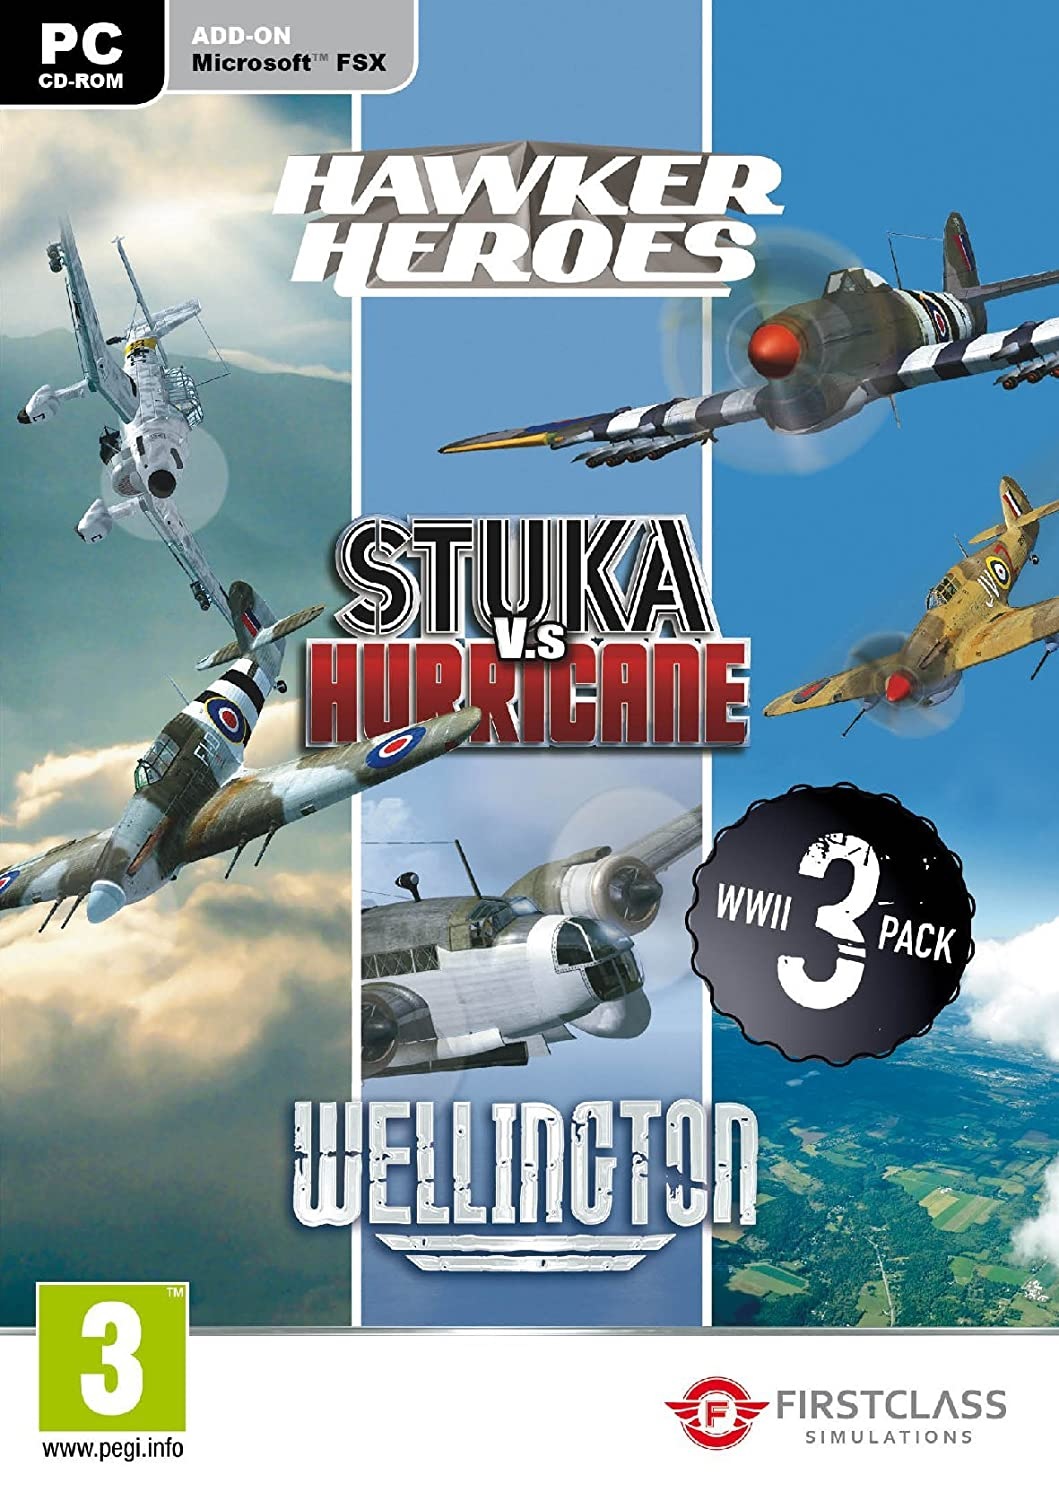 WWII Collection for FSX (PC DVD)